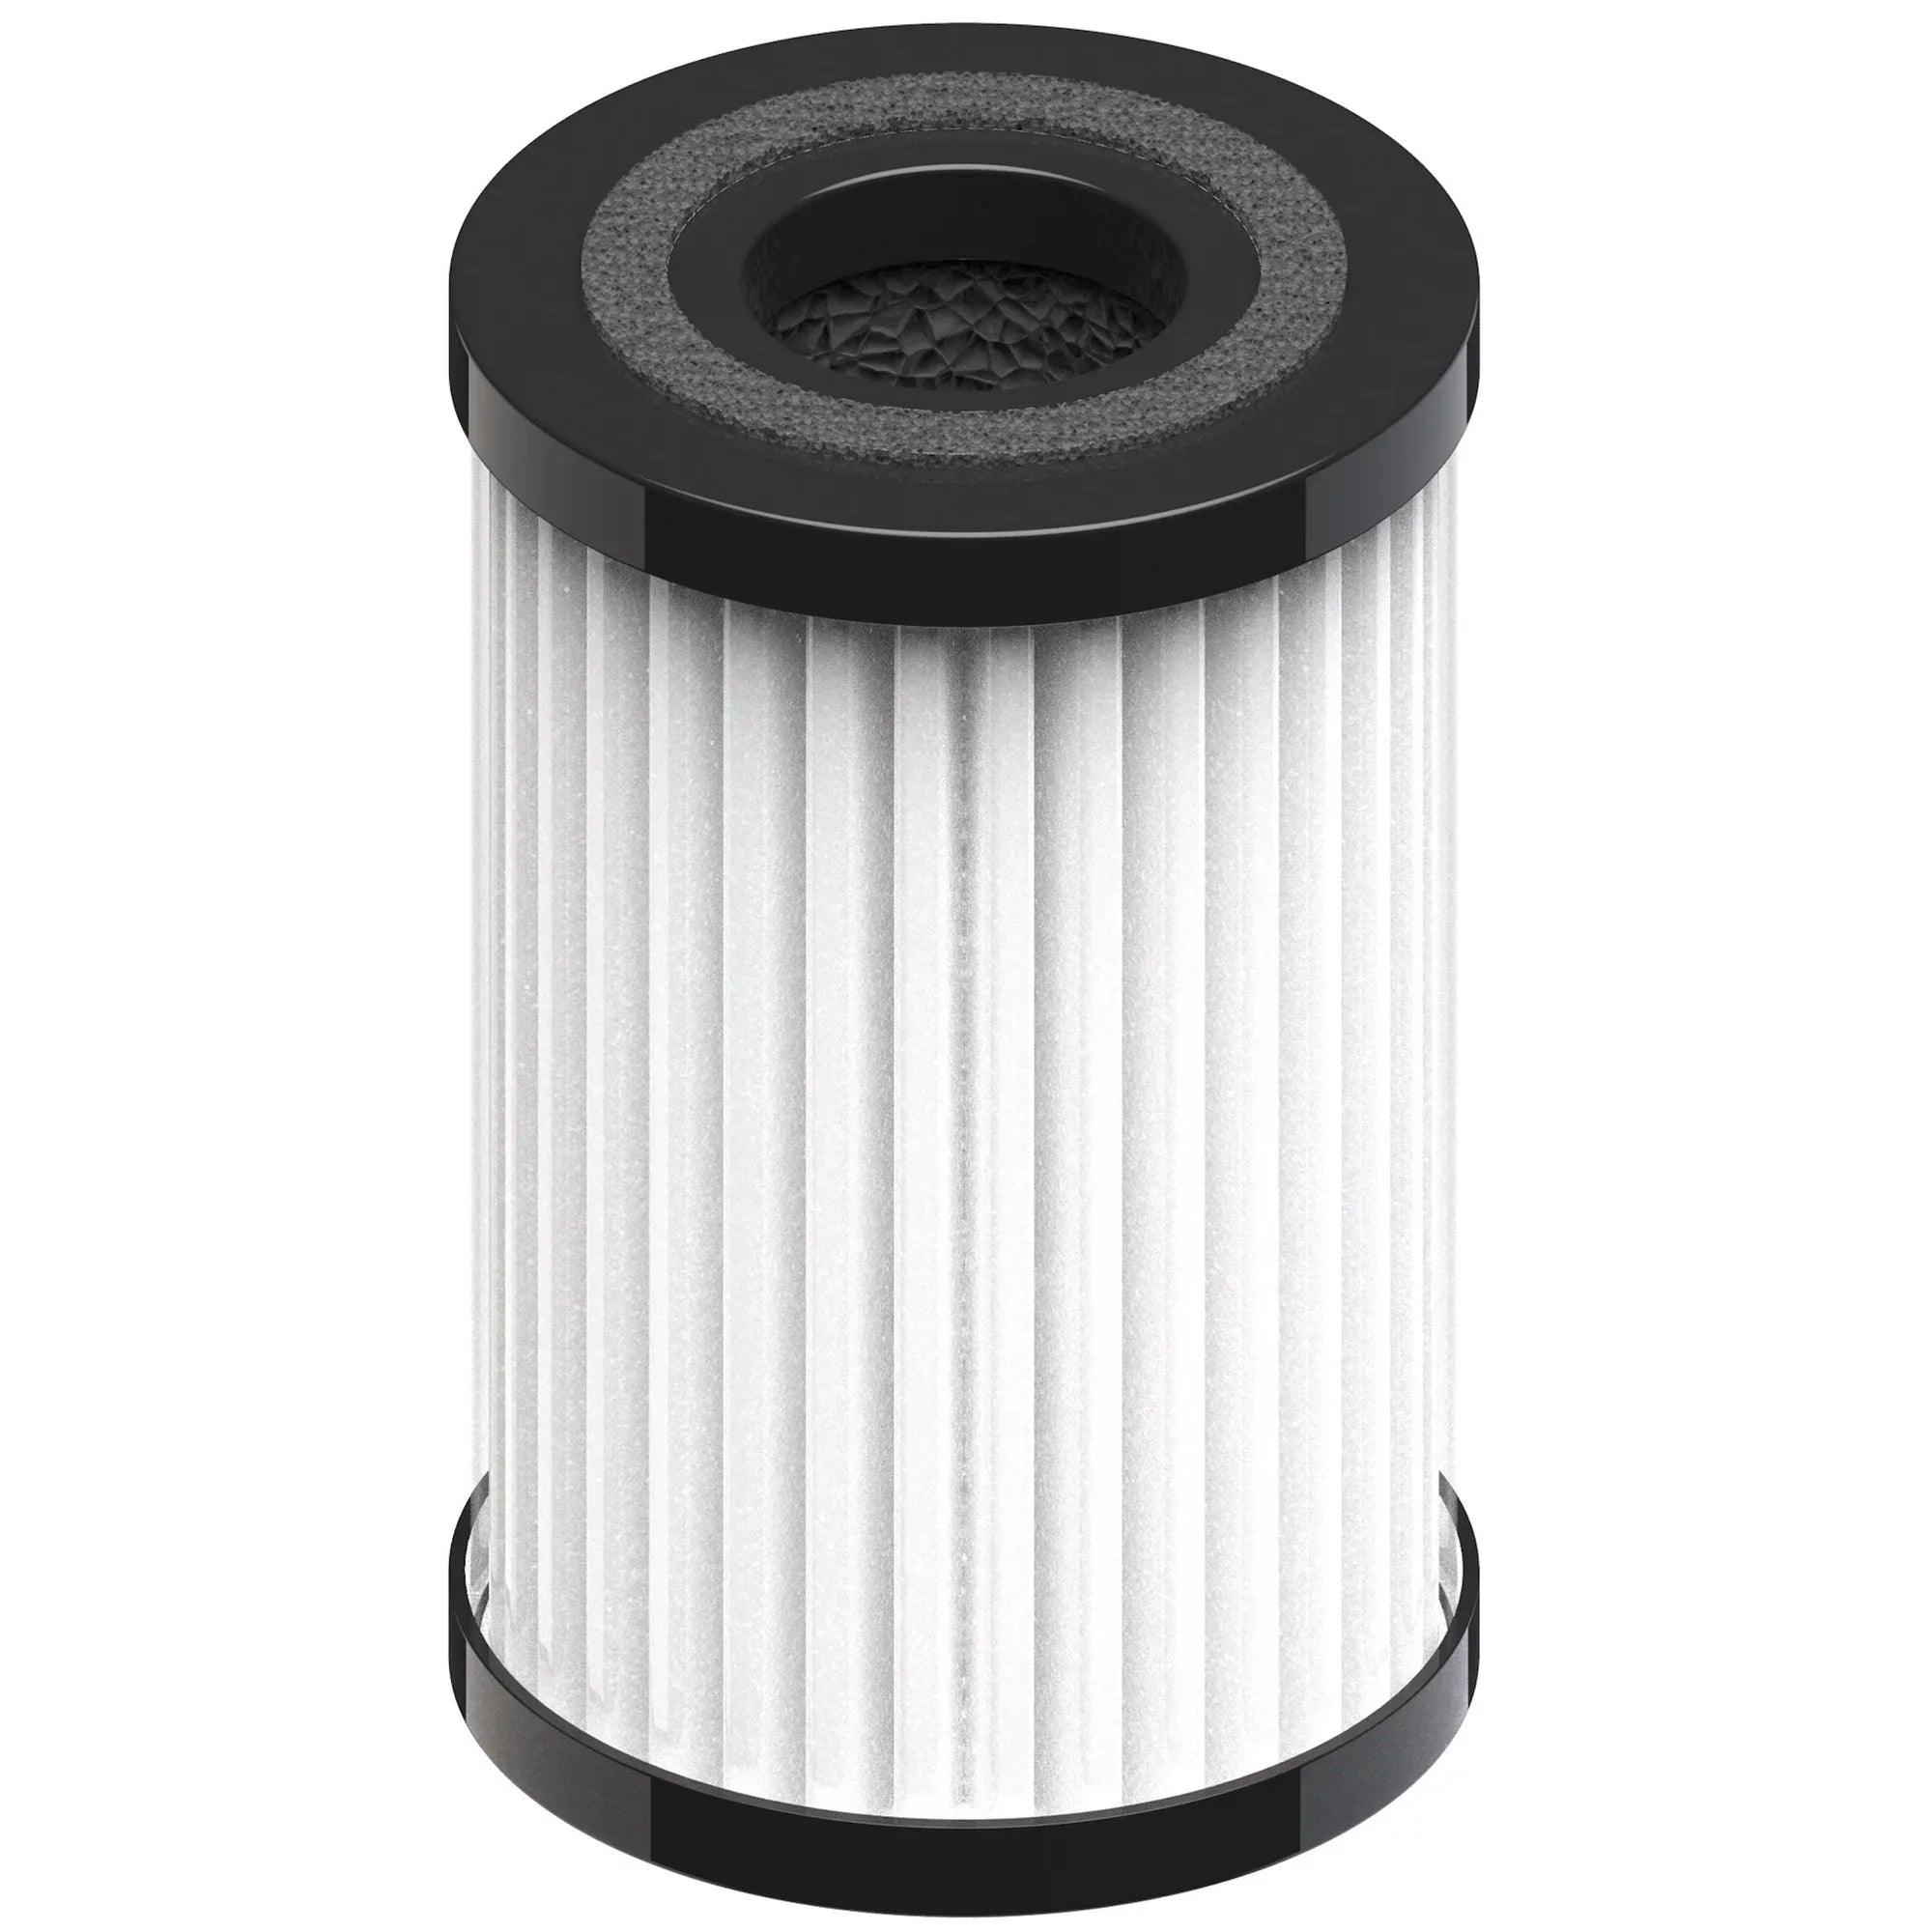 Wholesale prices with free shipping all over United States Scosche AFP2RF-SP Fresche Replacement H13 HEPA Air Filter for Use with Scosche Model AFP2-SP - Steven Deals